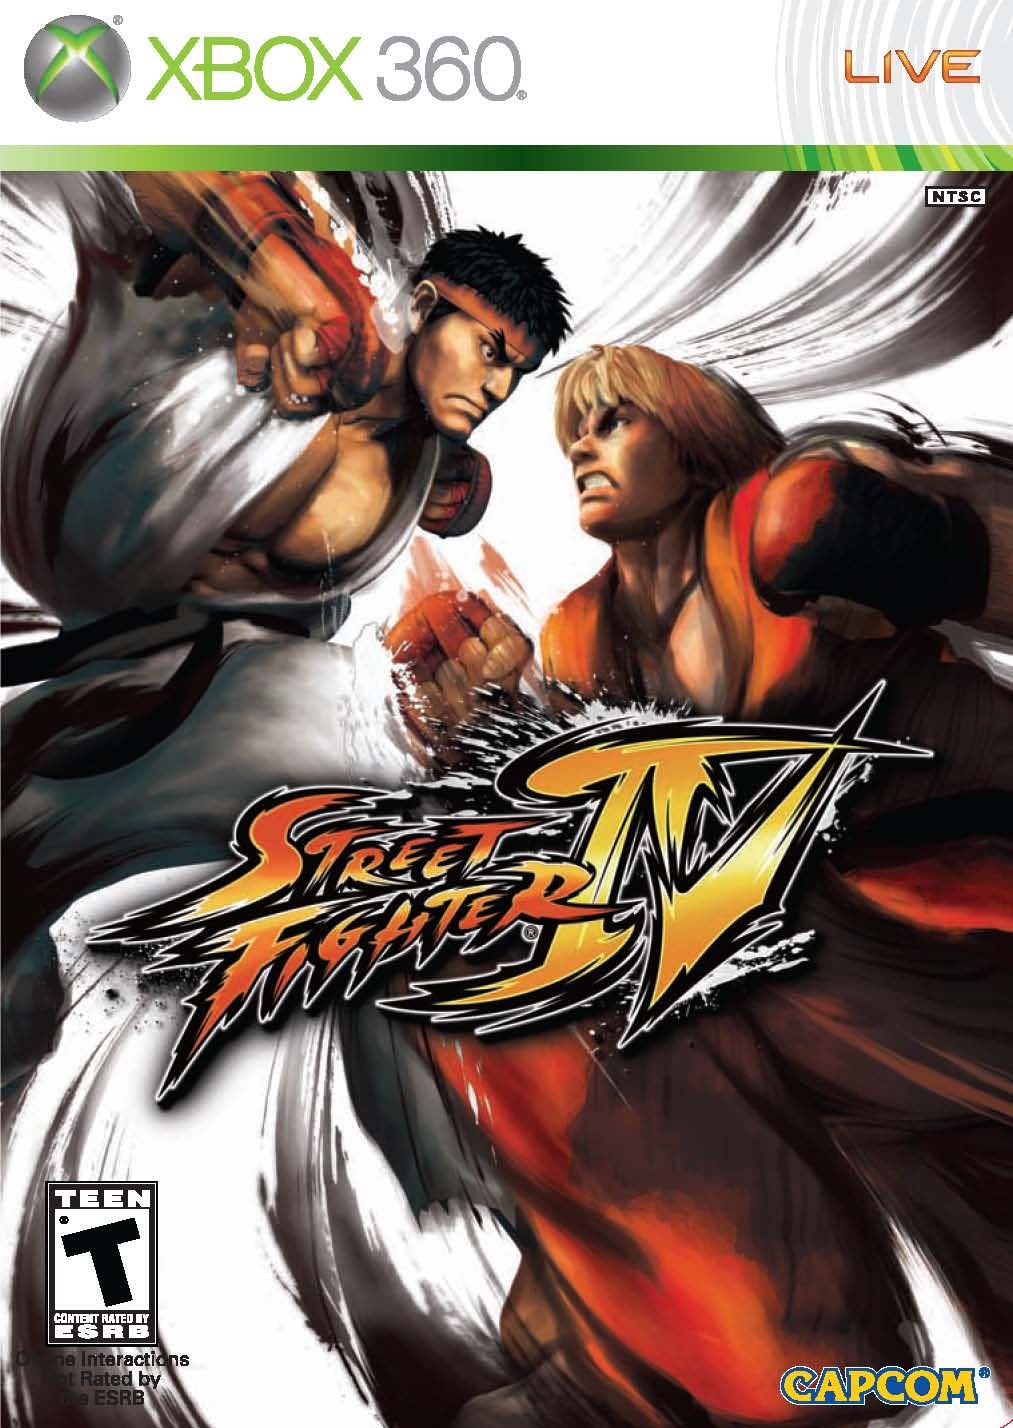 Street Fighter IV Video Game